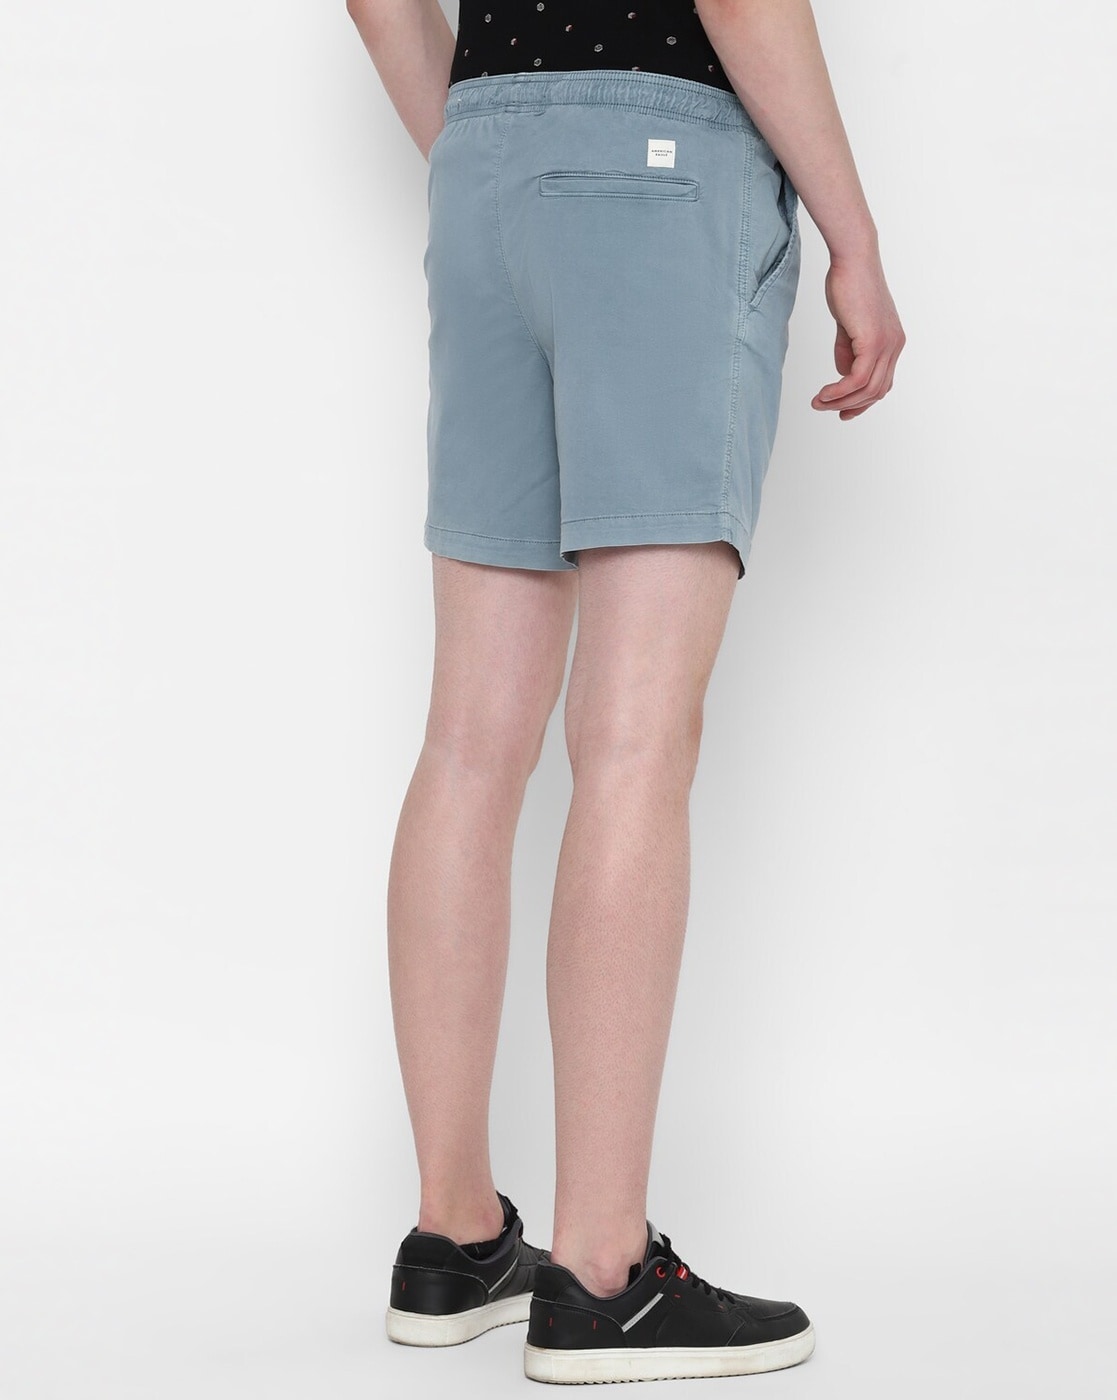 Buy Blue Shorts & 3/4ths for Men by AMERICAN EAGLE Online